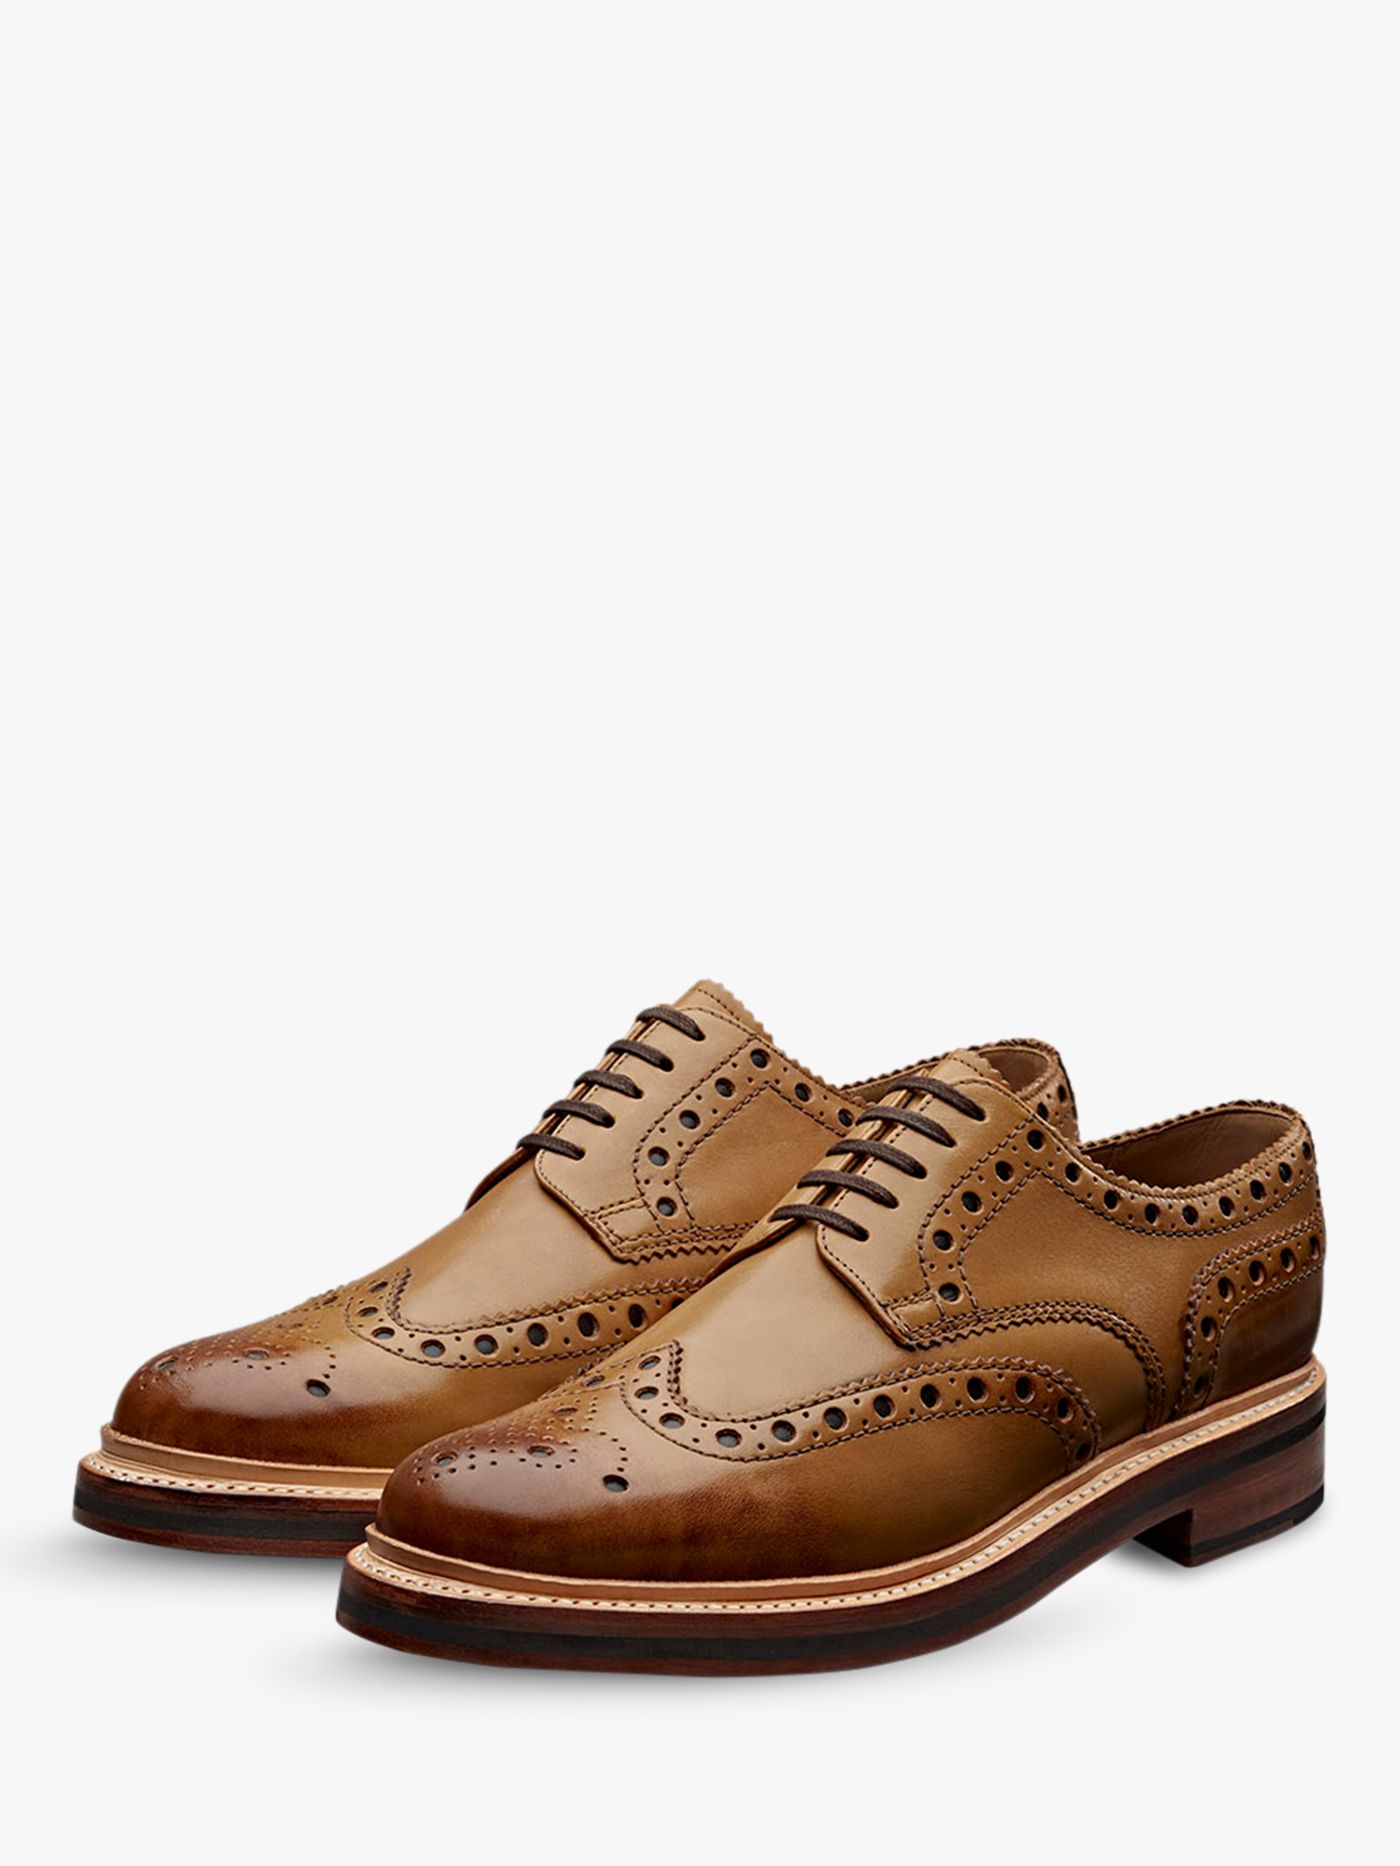 for Men Mens Shoes Lace-ups Brogues Brown Grenson Leather Archie Gibson Brogue in Tan 